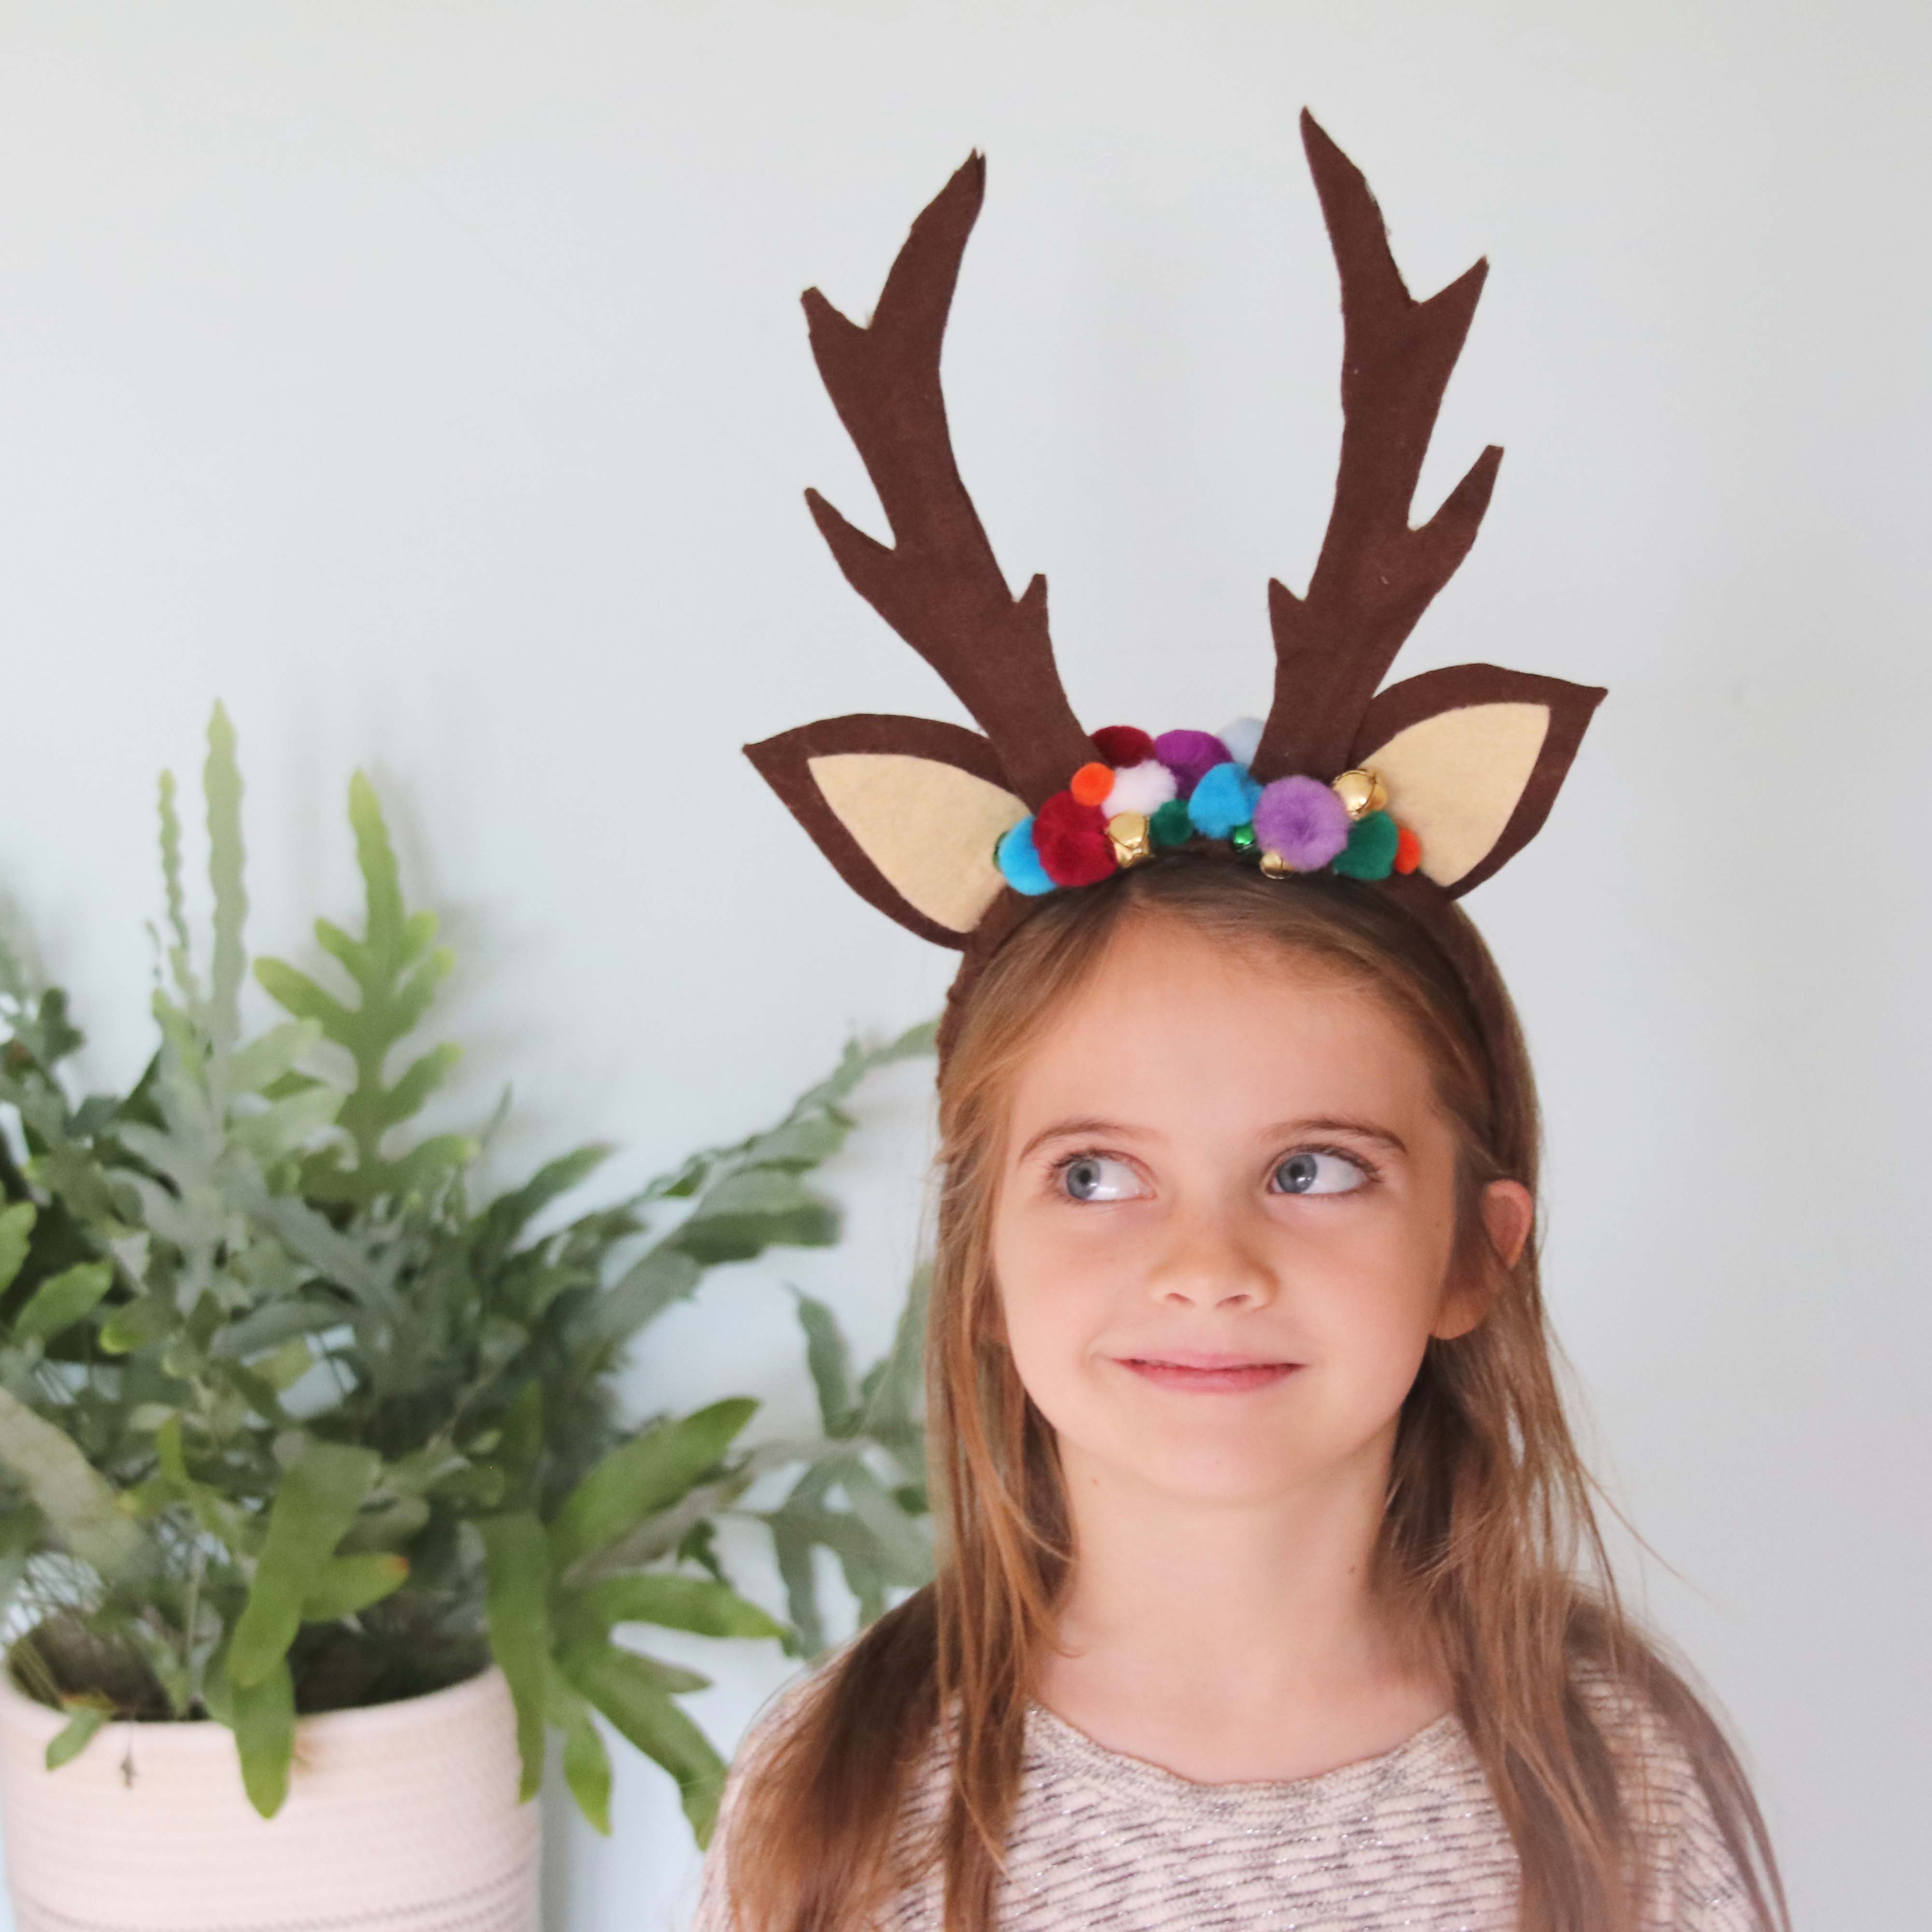 4 Quick Christmas Projects to Make with Kids | Hobbycraft